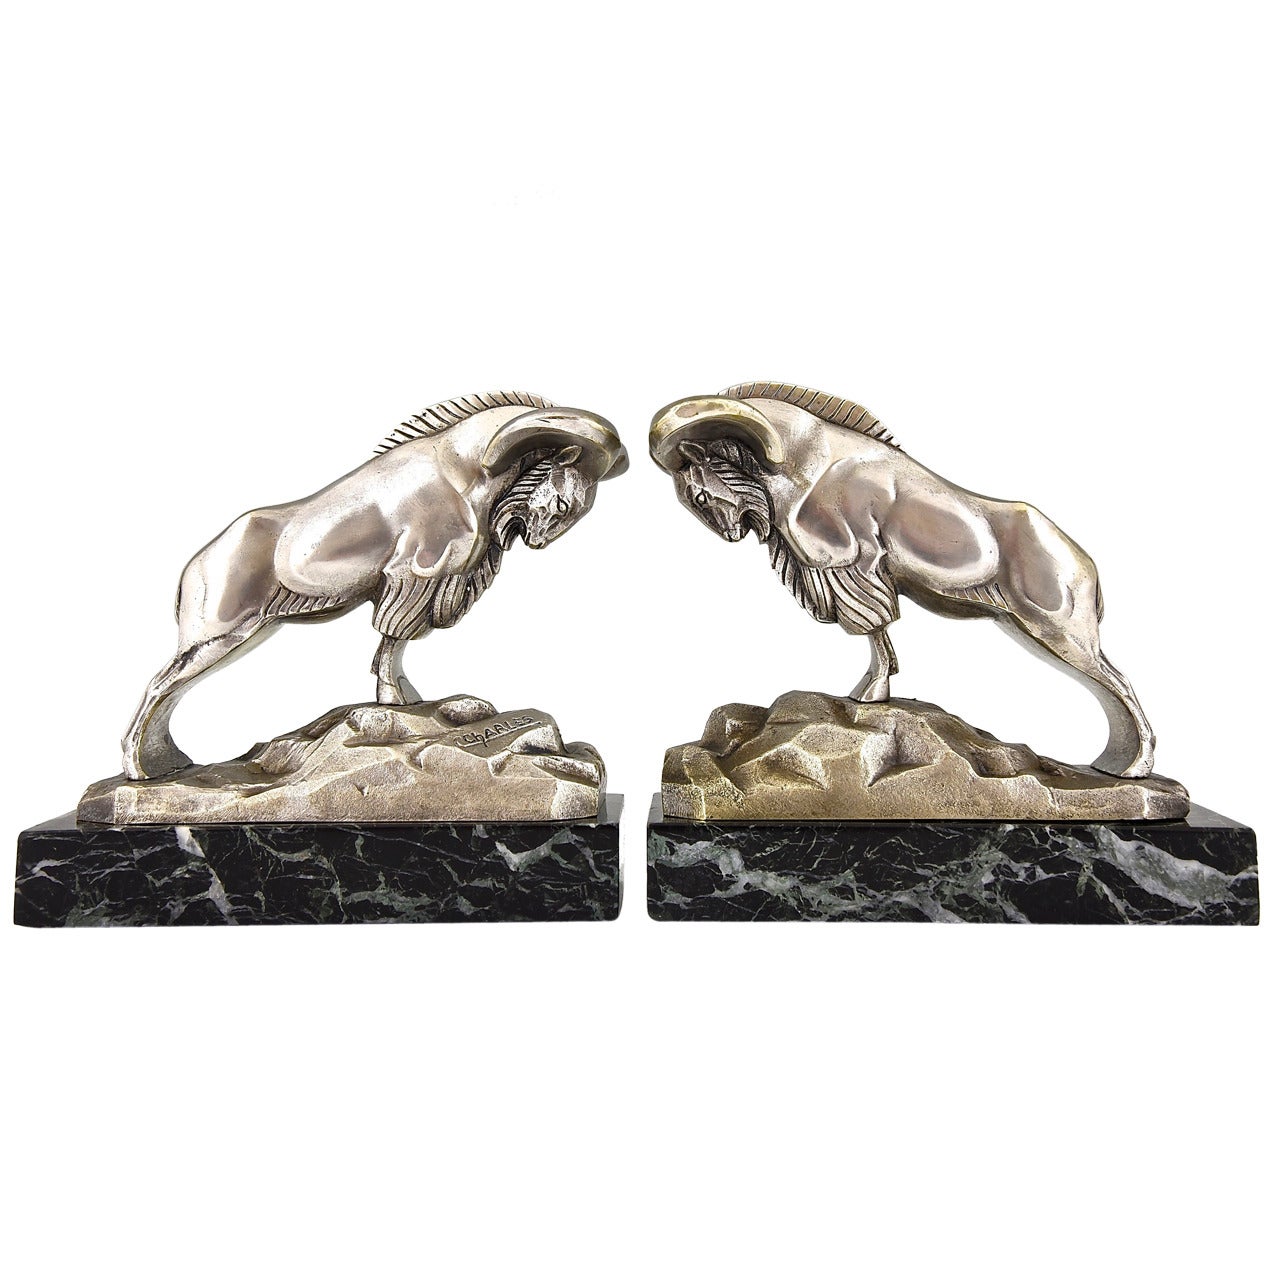 French Art Deco Bronze Ibex or Ram Sculpture Bookends by C. Charles, 1930